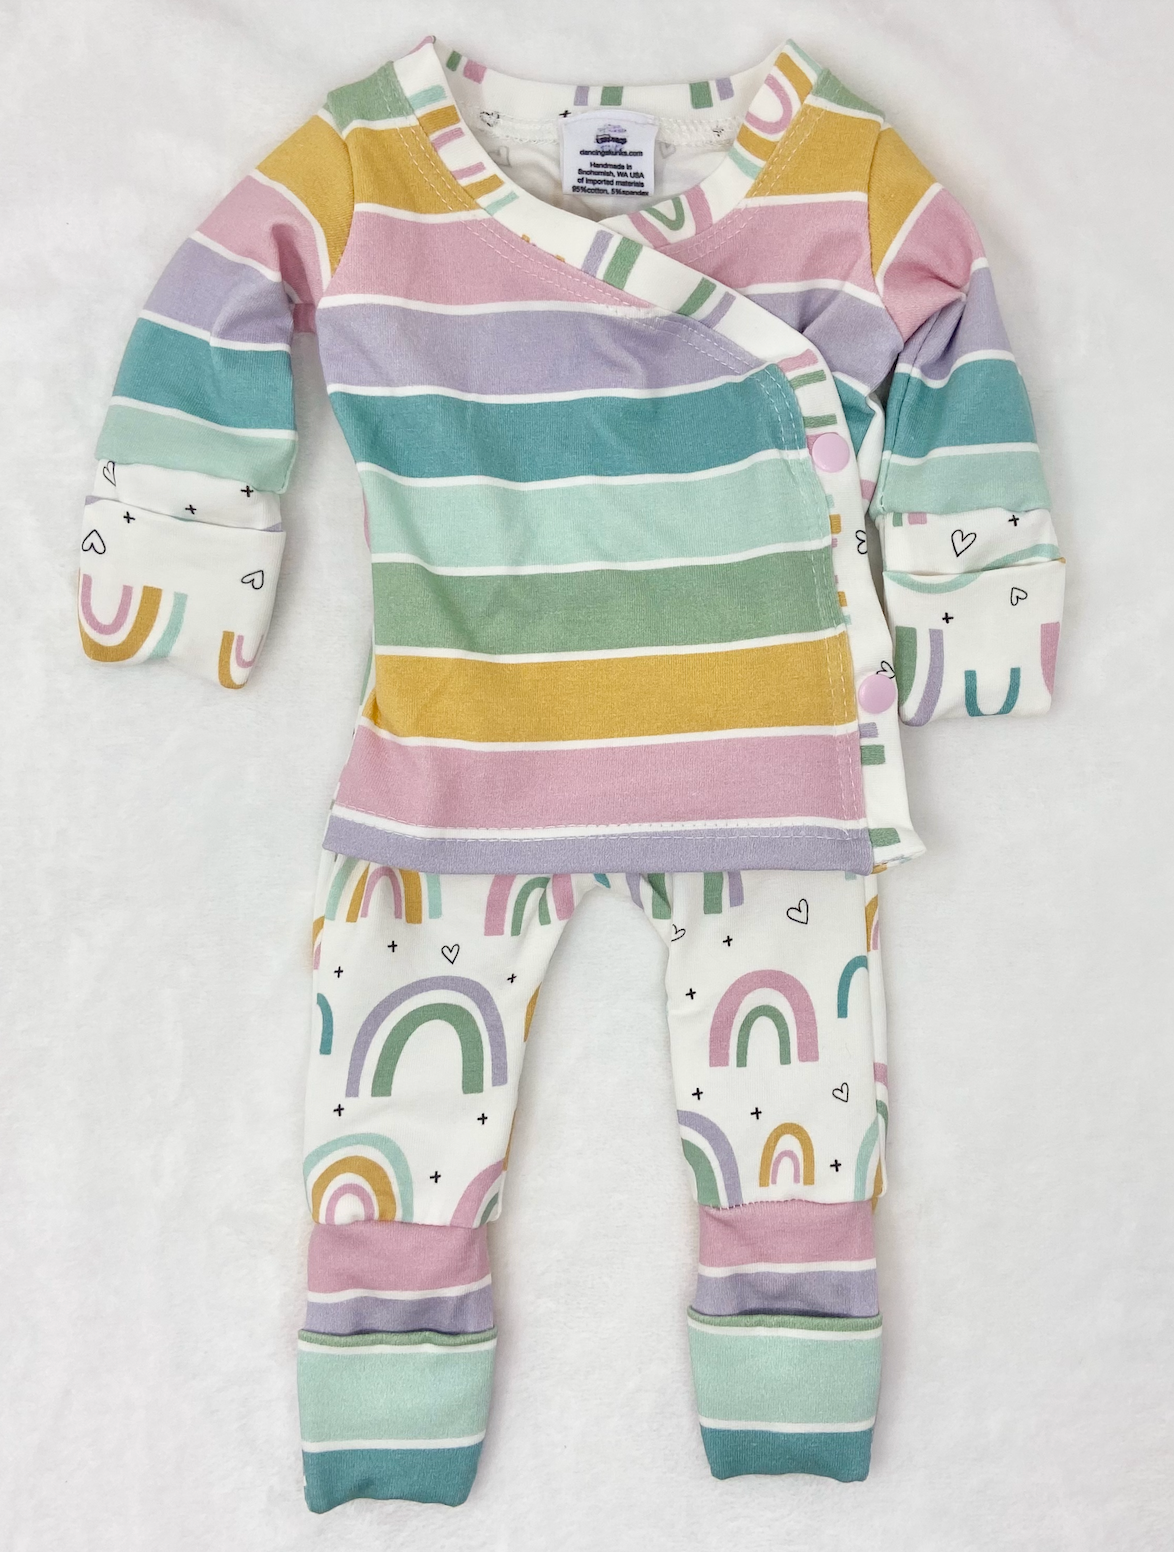 Newborn clothes, Newborn romper, baby clothes, rainbow baby, rainbow baby outfit, rainbow baby clothes, NICU clothes, NICU outfit, skin to skin with baby, grow with me outfit for baby, baby girl clothes, preemie clothes, preemie outfit, going home outfit, Kangaroo care outfit, rainbow baby, rainbow baby outfit